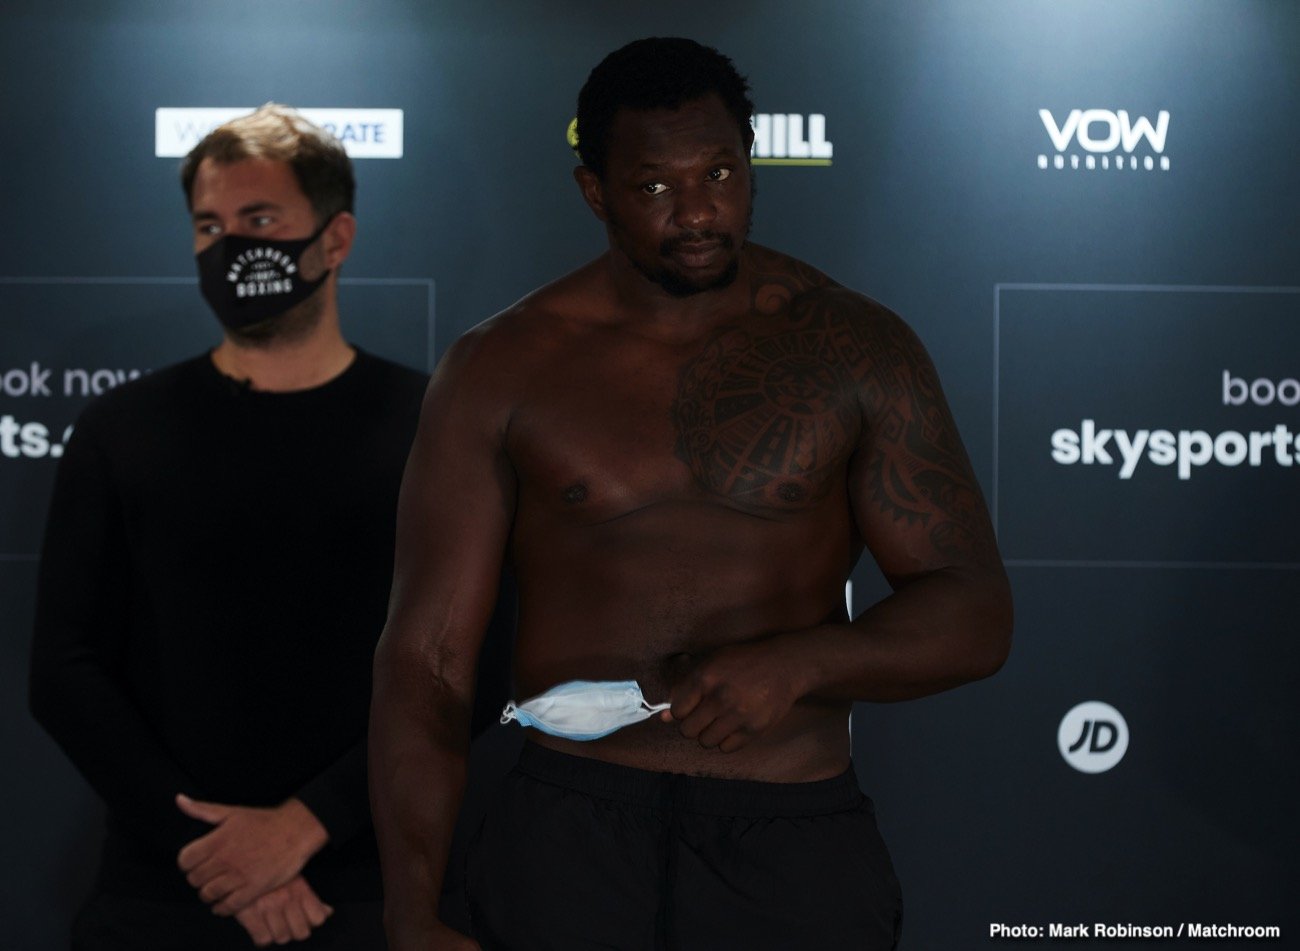 WATCH LIVE: Dillian Whyte vs. Alexander Povetkin - Katie Taylor vs Persoon II Weigh In